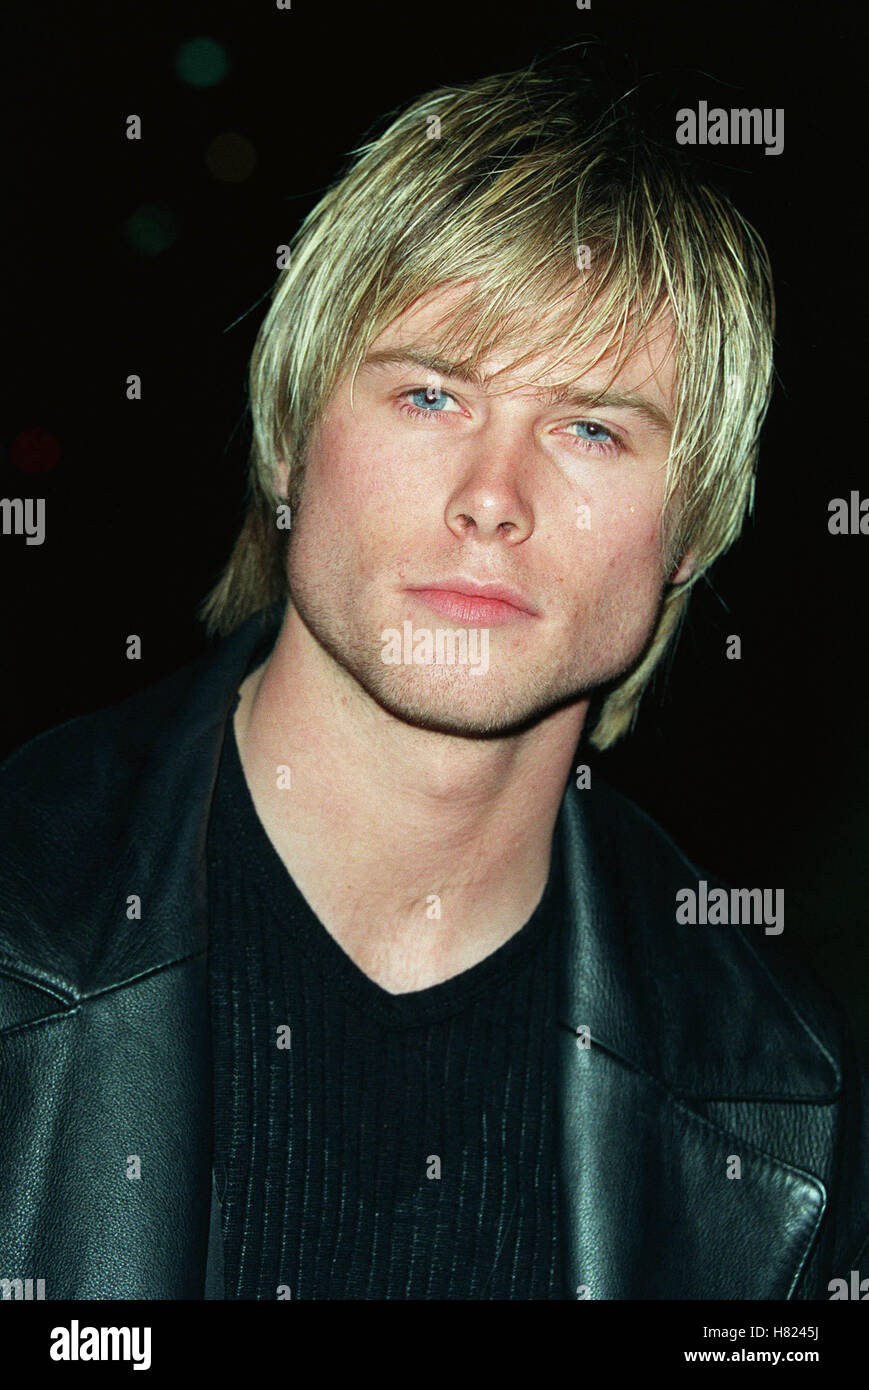 JACOB YOUNG 'THE GIFT' FILM PREMIERE 18 December 2000 Stock Photo